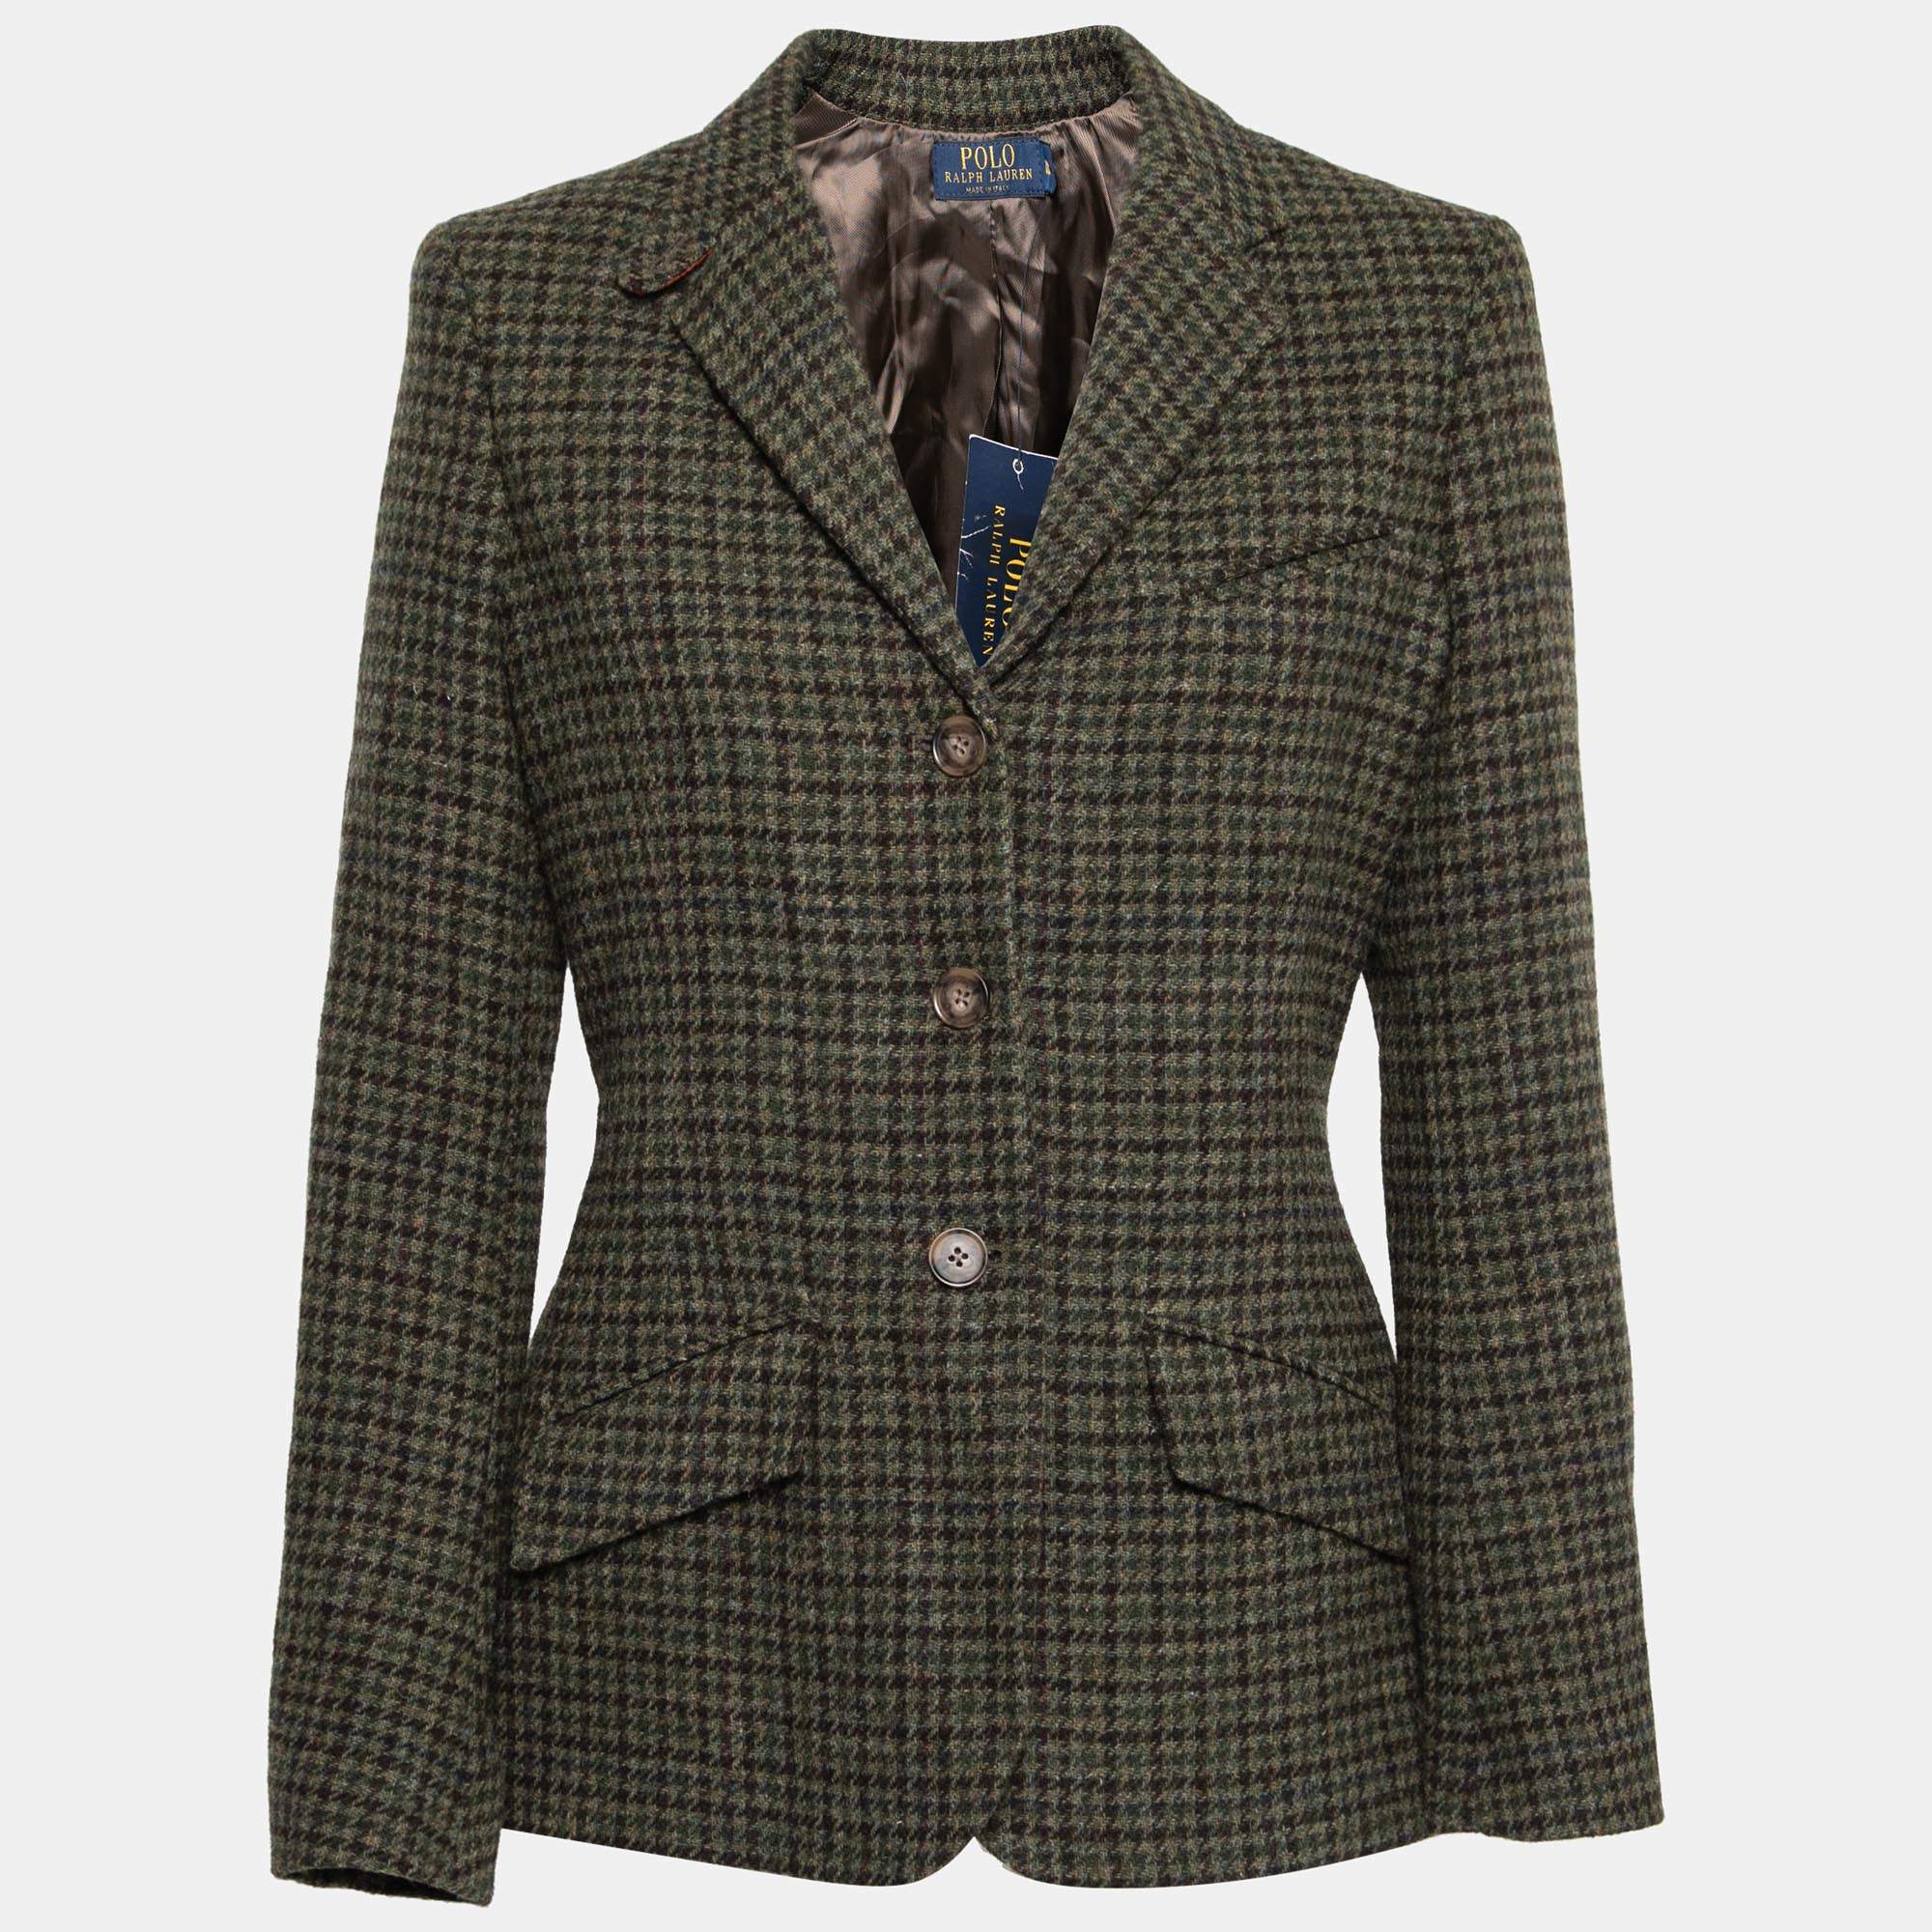 Polo By Ralph Lauren Olive Green Checked Tweed Jacket L Polo Ralph Lauren |  TLC